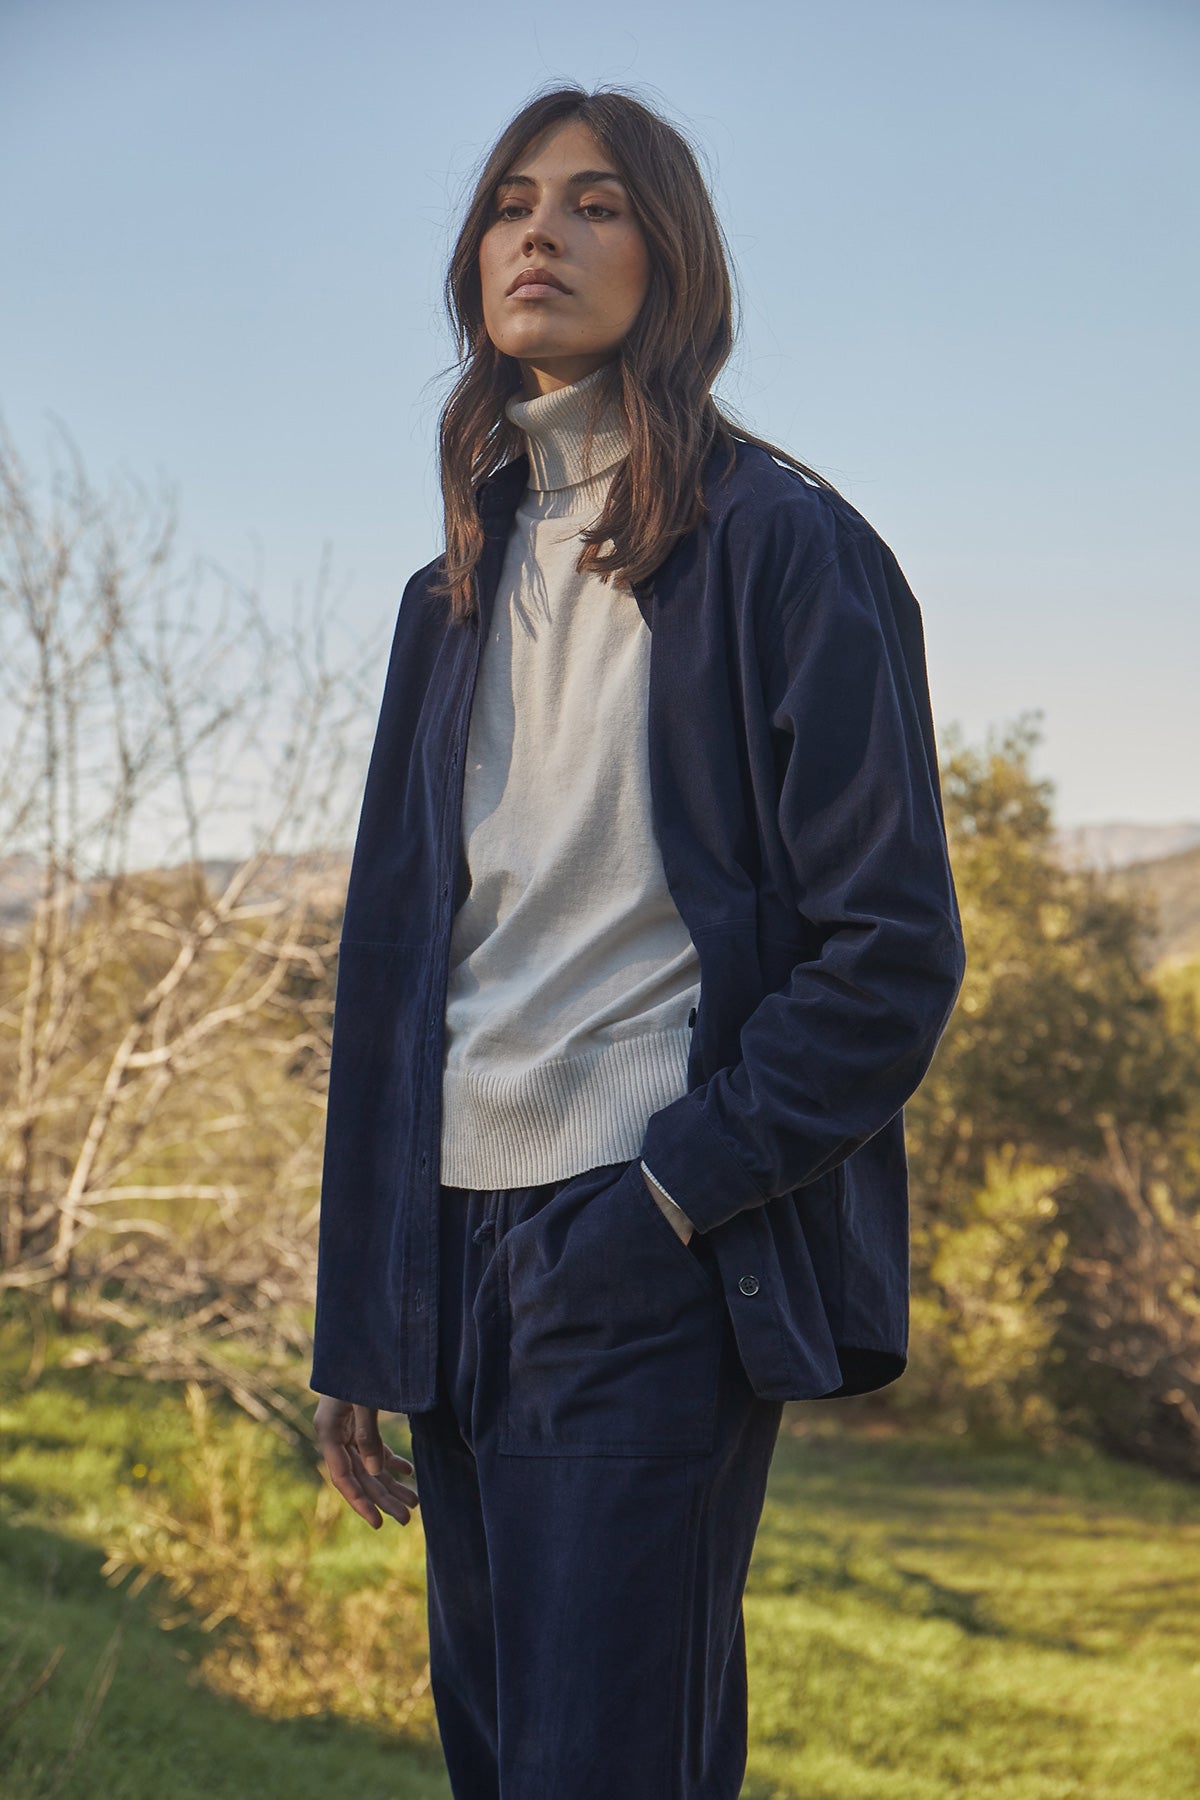   Model standing outside wearing Jeslyn Corduroy Button-Up Shirt in dark blue night color, Renny Sweater and Aspen pants in navy.  